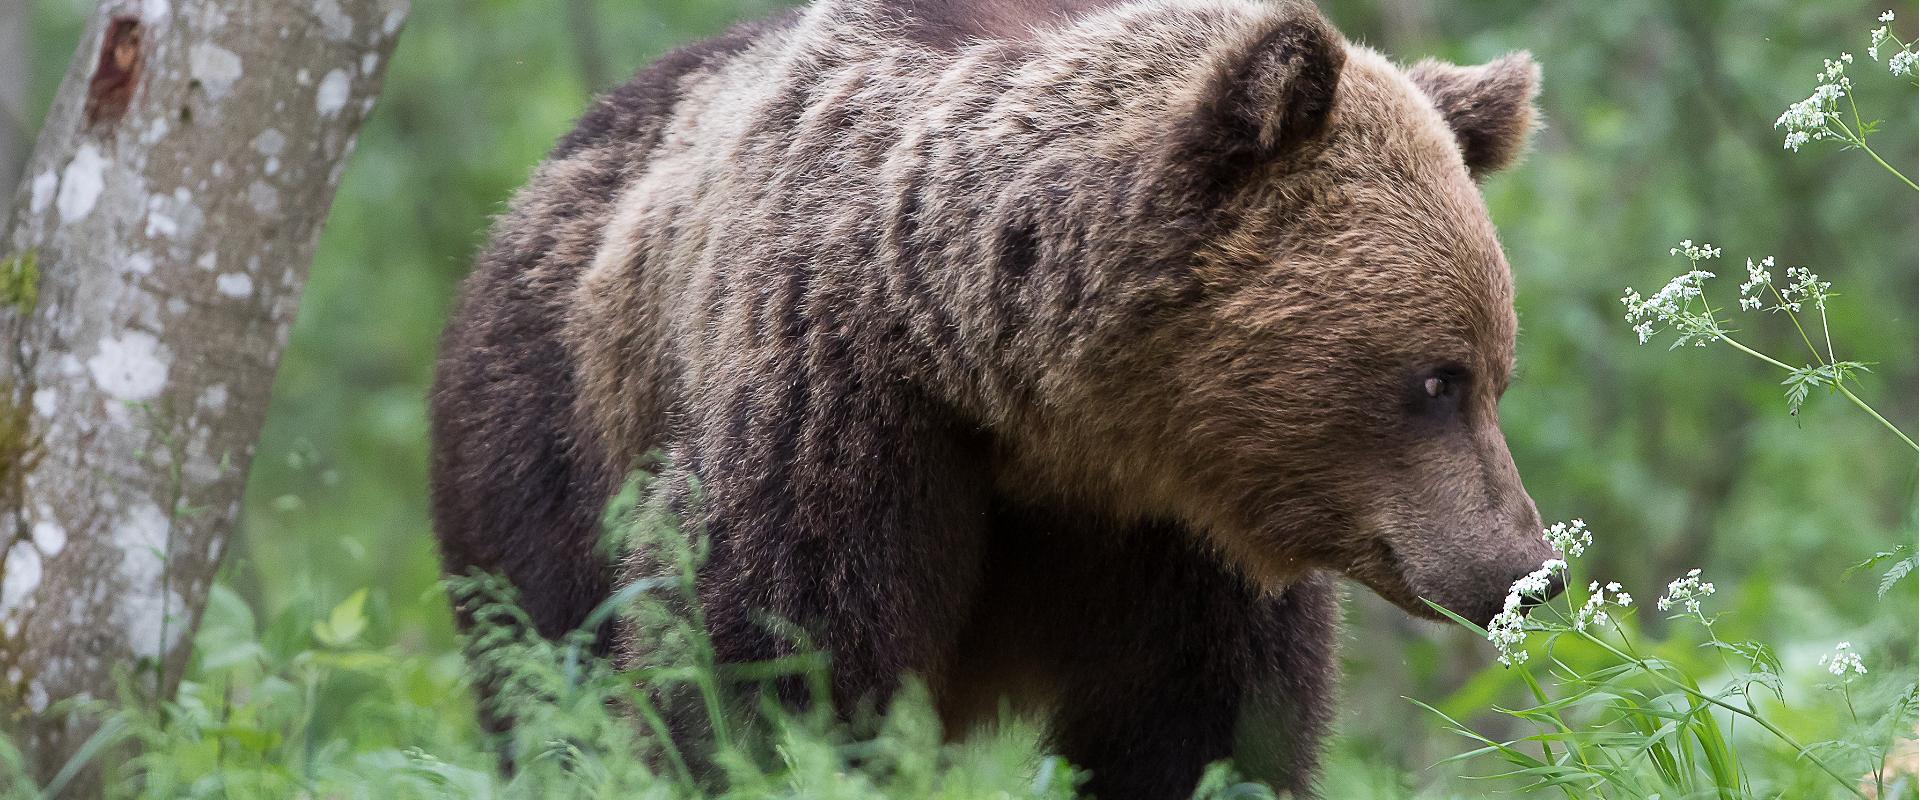 Bears are just an hour’s drive from Tallinn! The shelter where we will observe bears is meant for three people and we will also spend the night there.